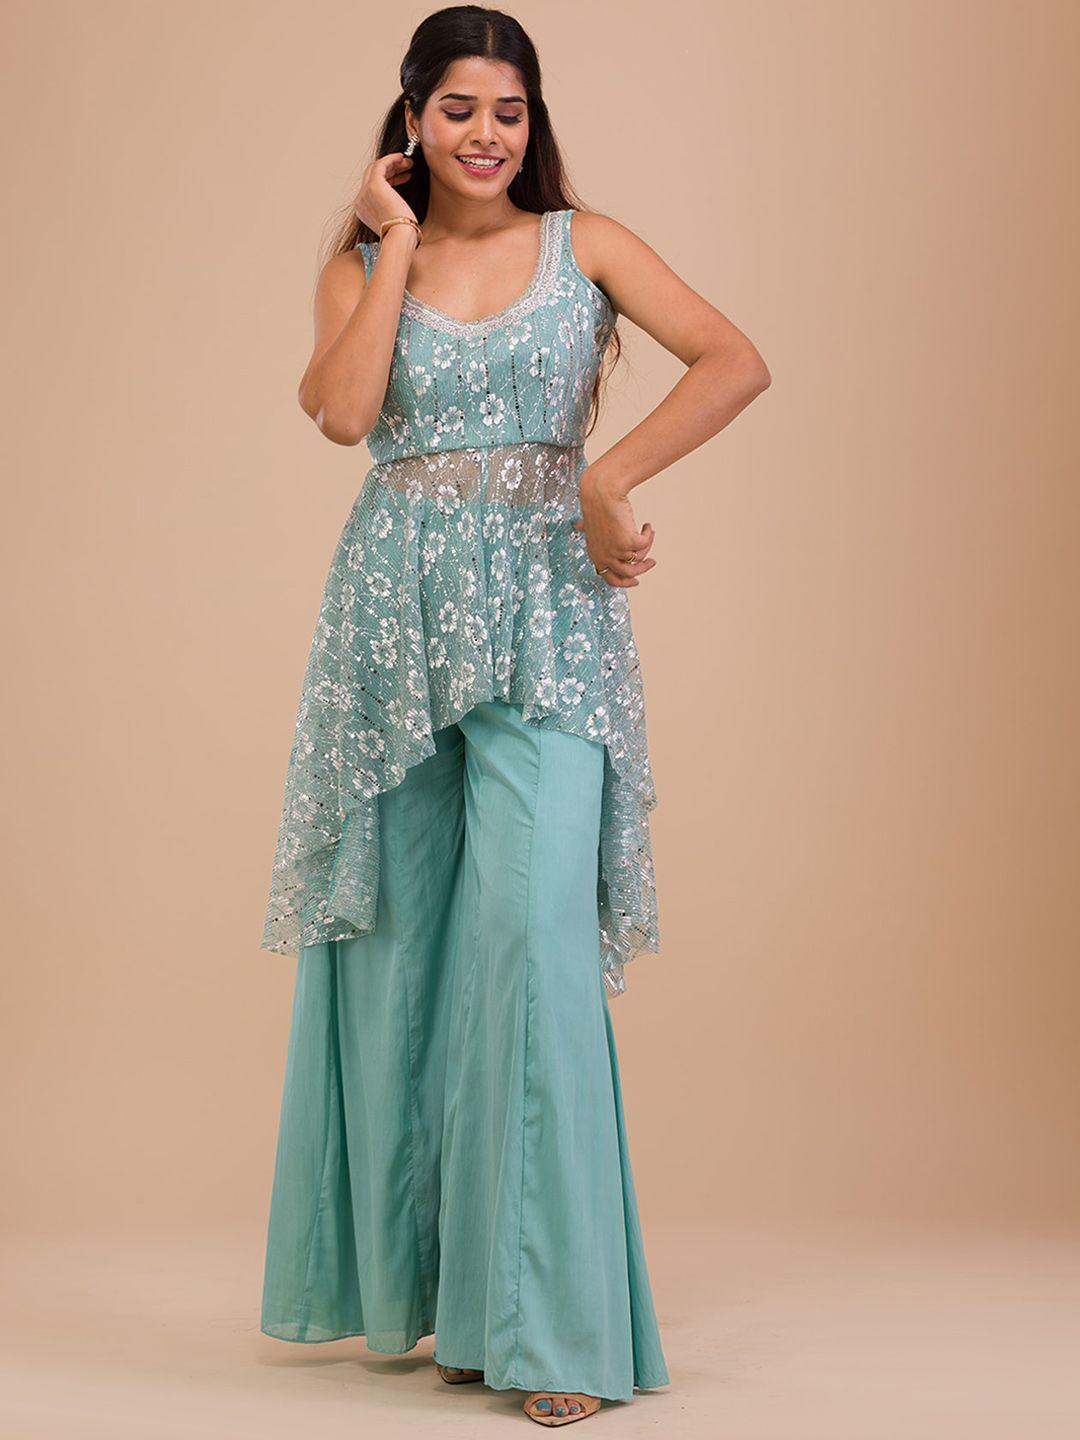 koskii-floral-embroidered-high-low-sequined-kurta-with-palazzos-&-dupatta